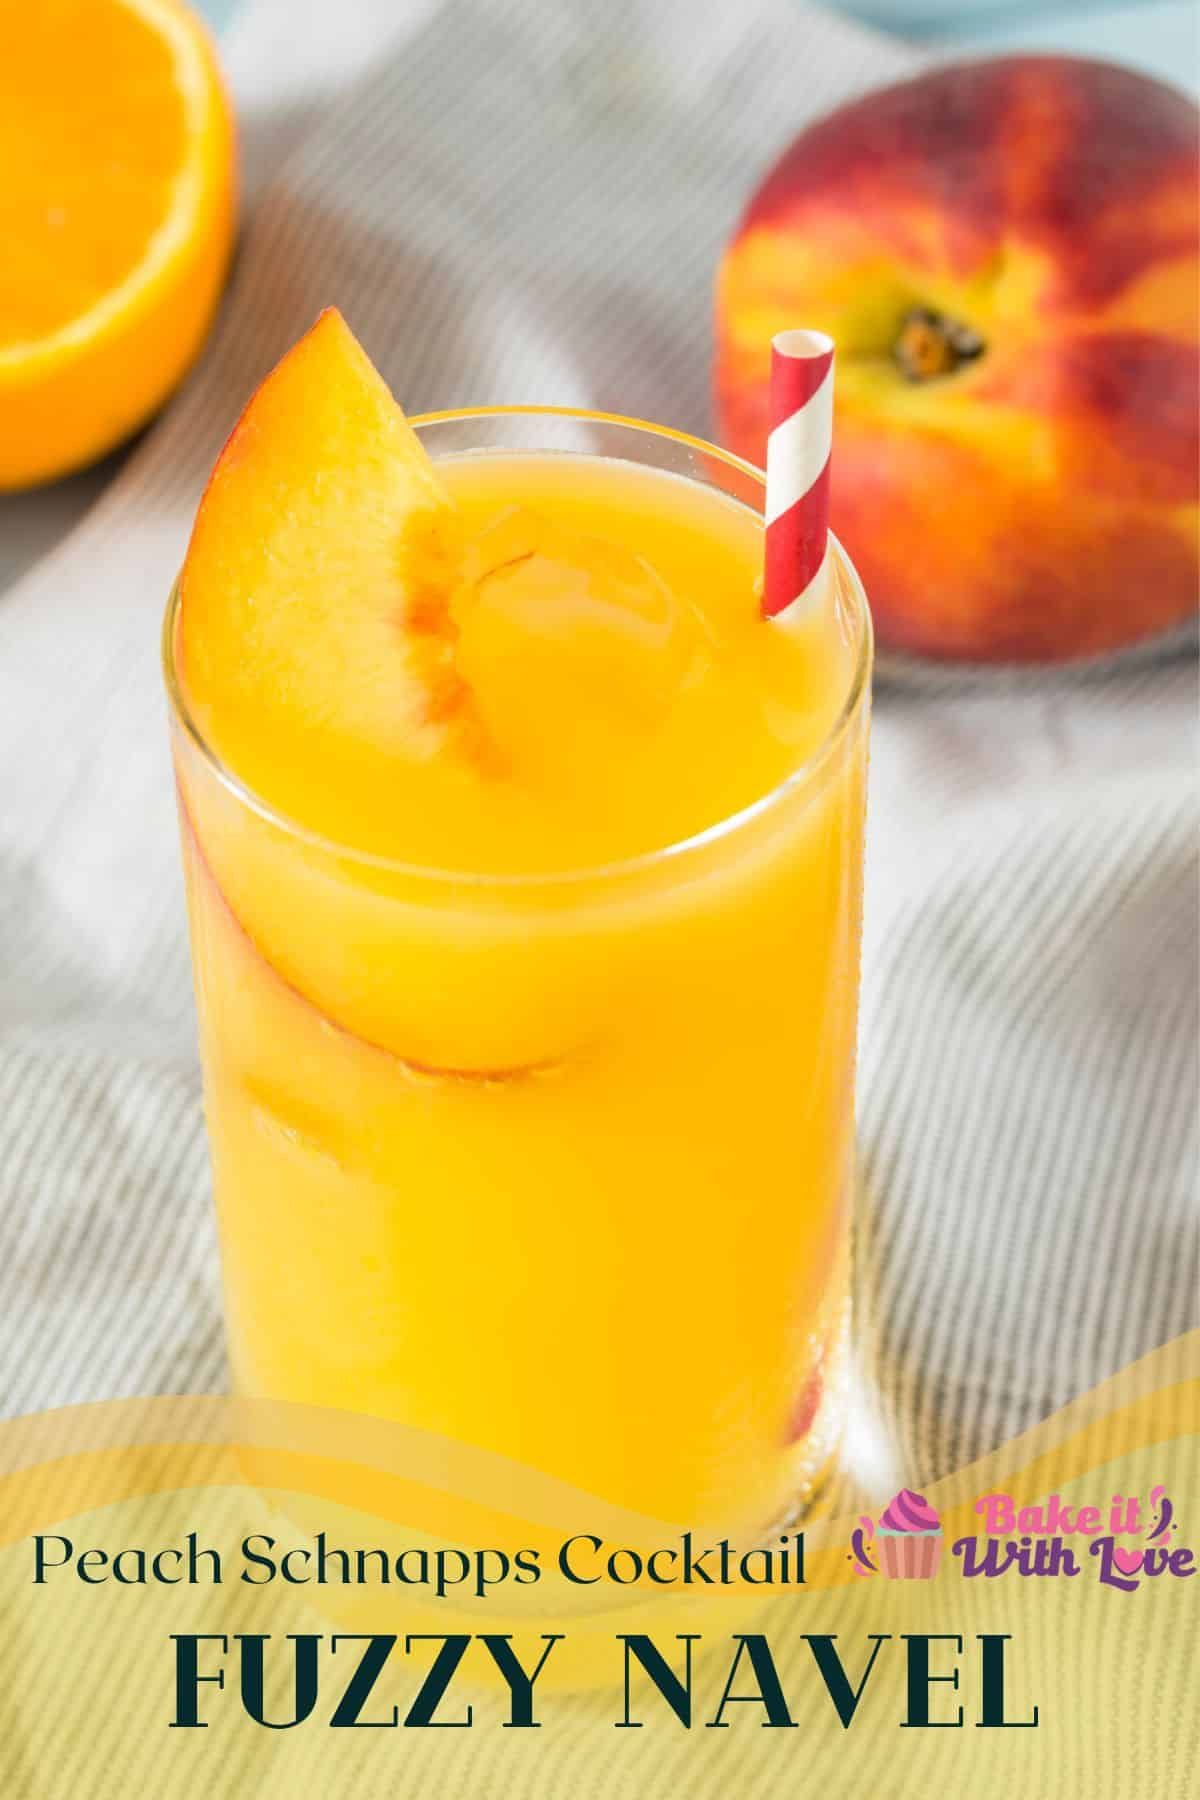 Best Fuzzy Navel: A Fruity Peach Schnapps and Orange Juice Cocktail!